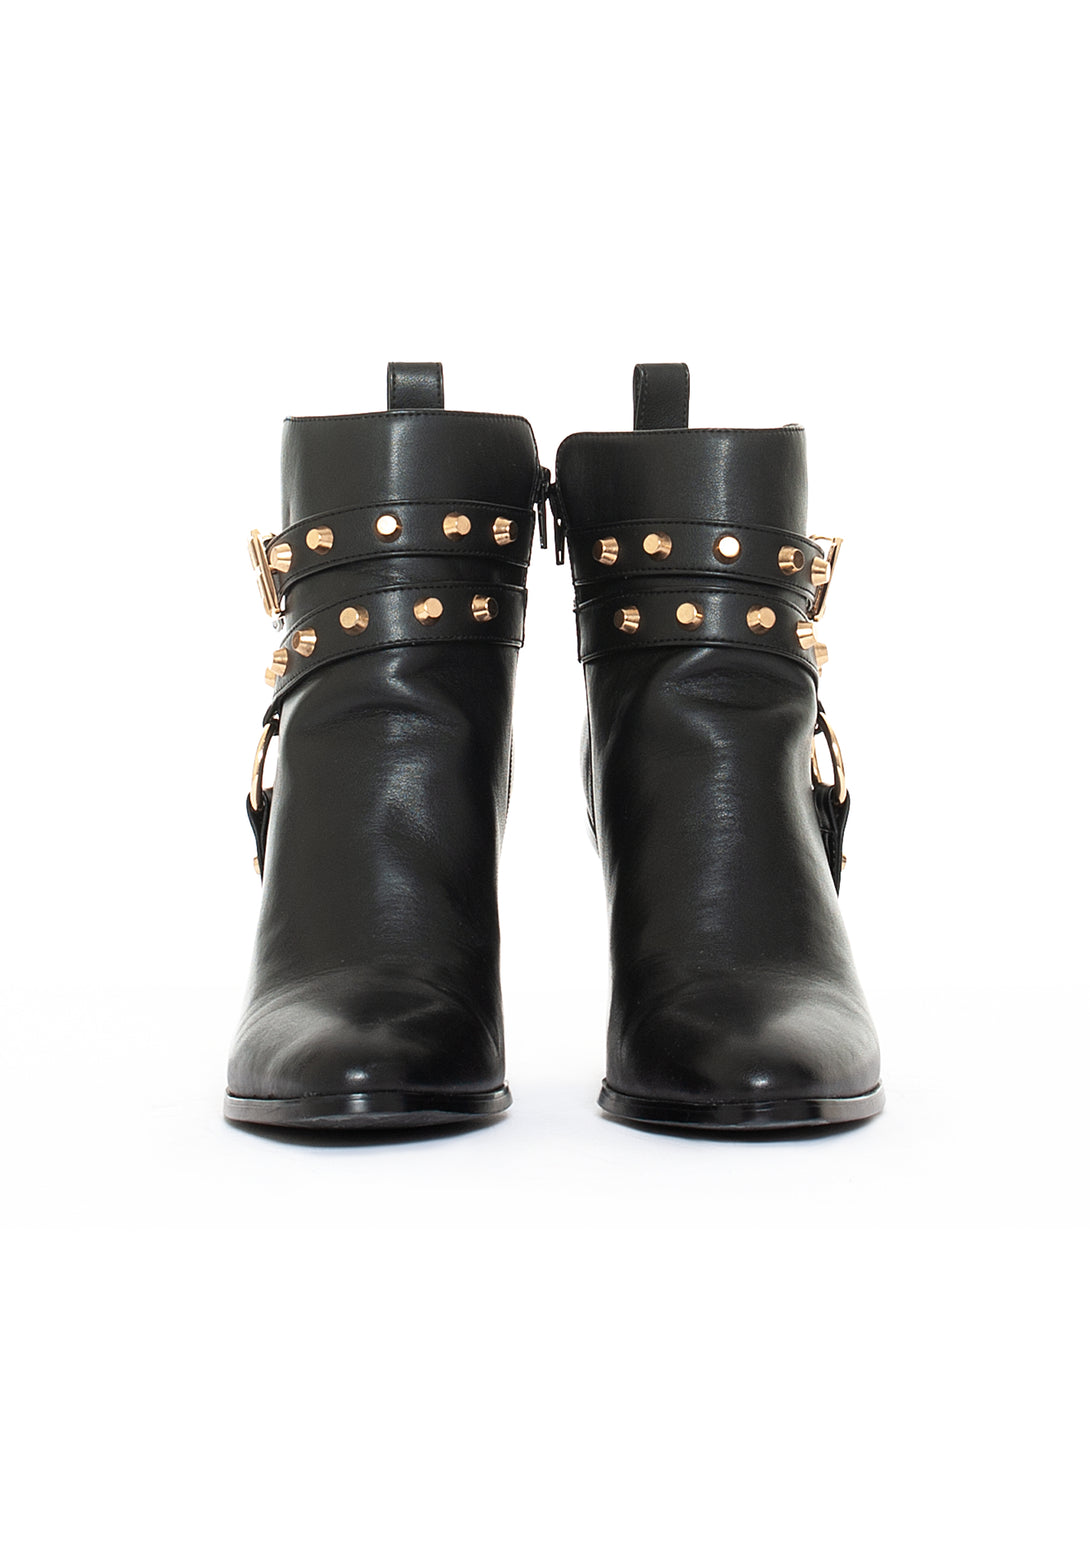 Ankle boots made in eco leather with metallic studs